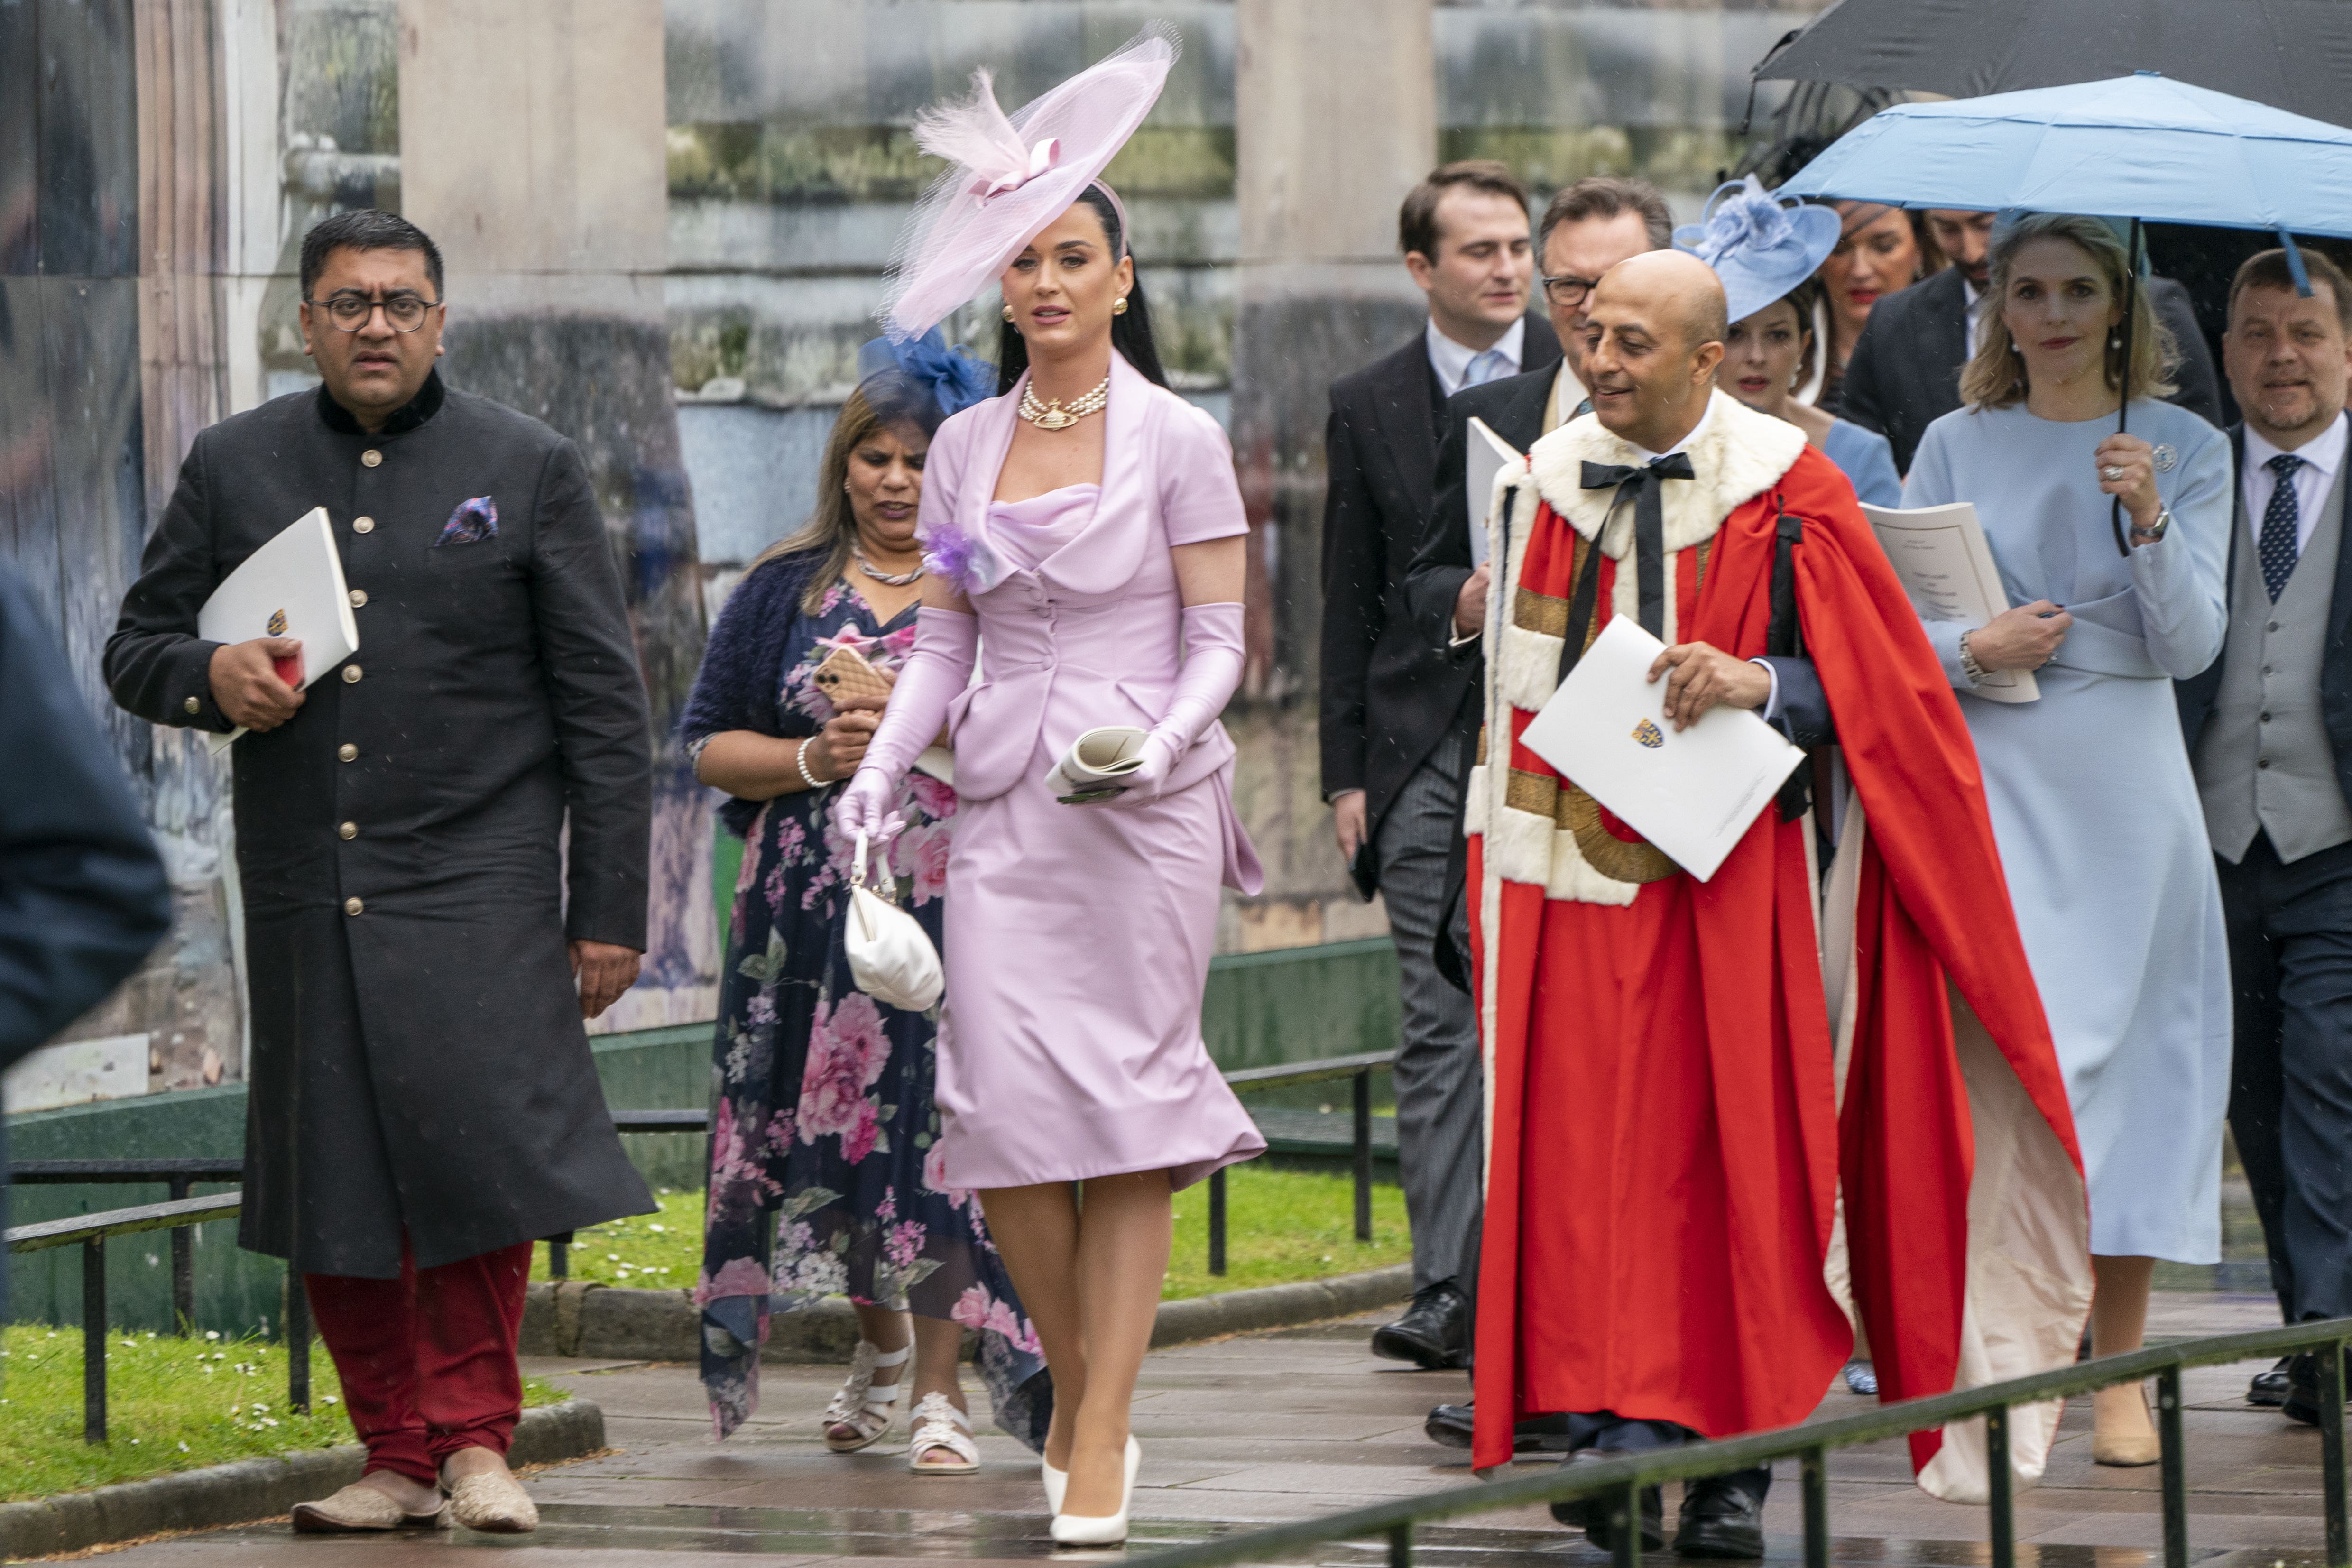 Katy Perry was among celebrity guests at the coronation (Jane Barlow/PA)